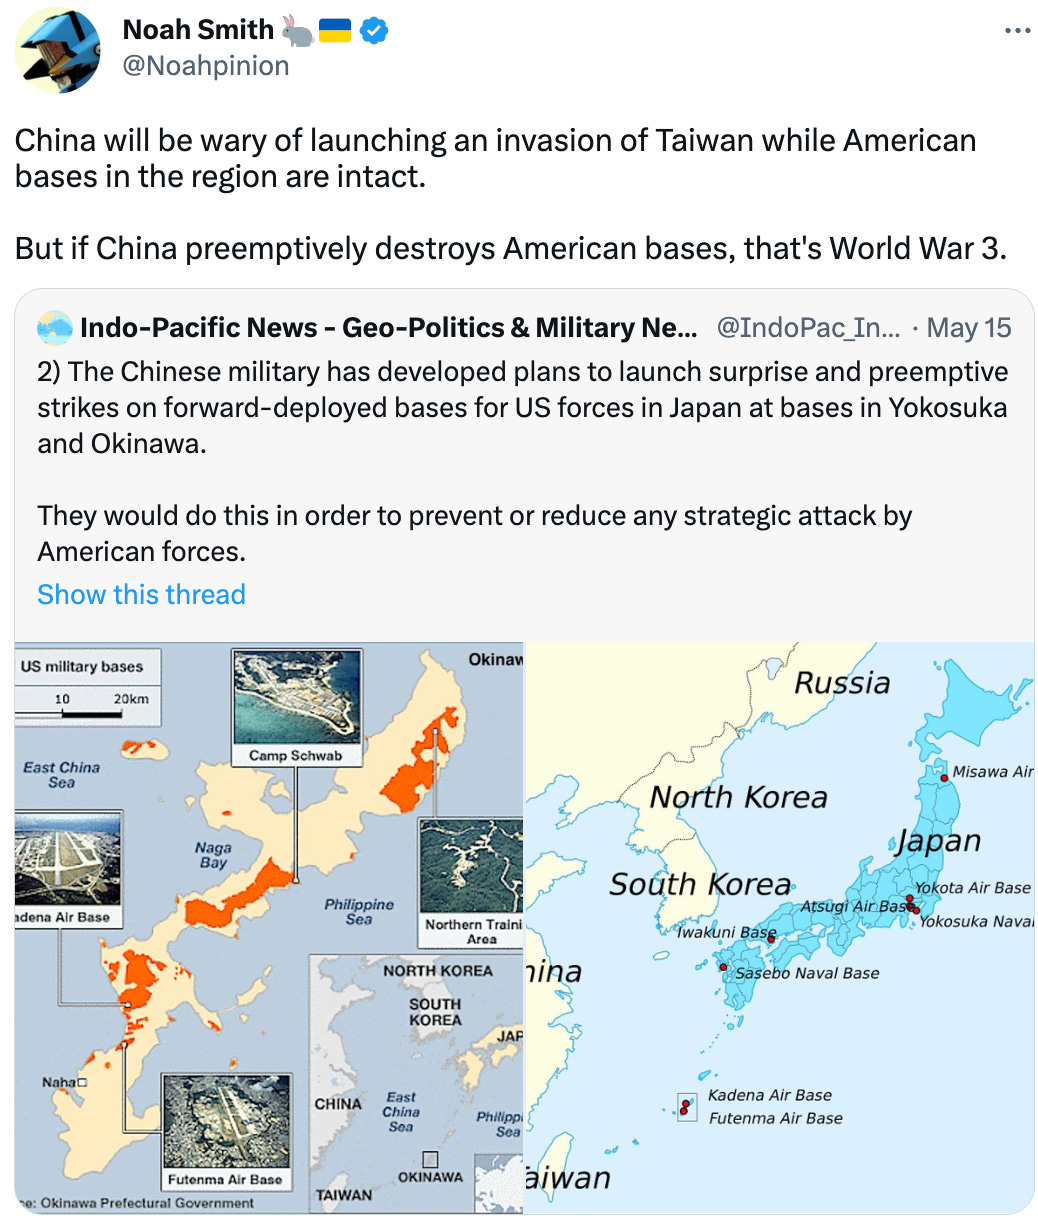  See new Tweets Conversation Noah Smith 🐇🇺🇦 @Noahpinion China will be wary of launching an invasion of Taiwan while American bases in the region are intact.  But if China preemptively destroys American bases, that's World War 3. Quote Tweet Indo-Pacific News - Geo-Politics & Military News @IndoPac_Info · May 15 2) The Chinese military has developed plans to launch surprise and preemptive strikes on forward-deployed bases for US forces in Japan at bases in Yokosuka and Okinawa.  They would do this in order to prevent or reduce any strategic attack by American forces.